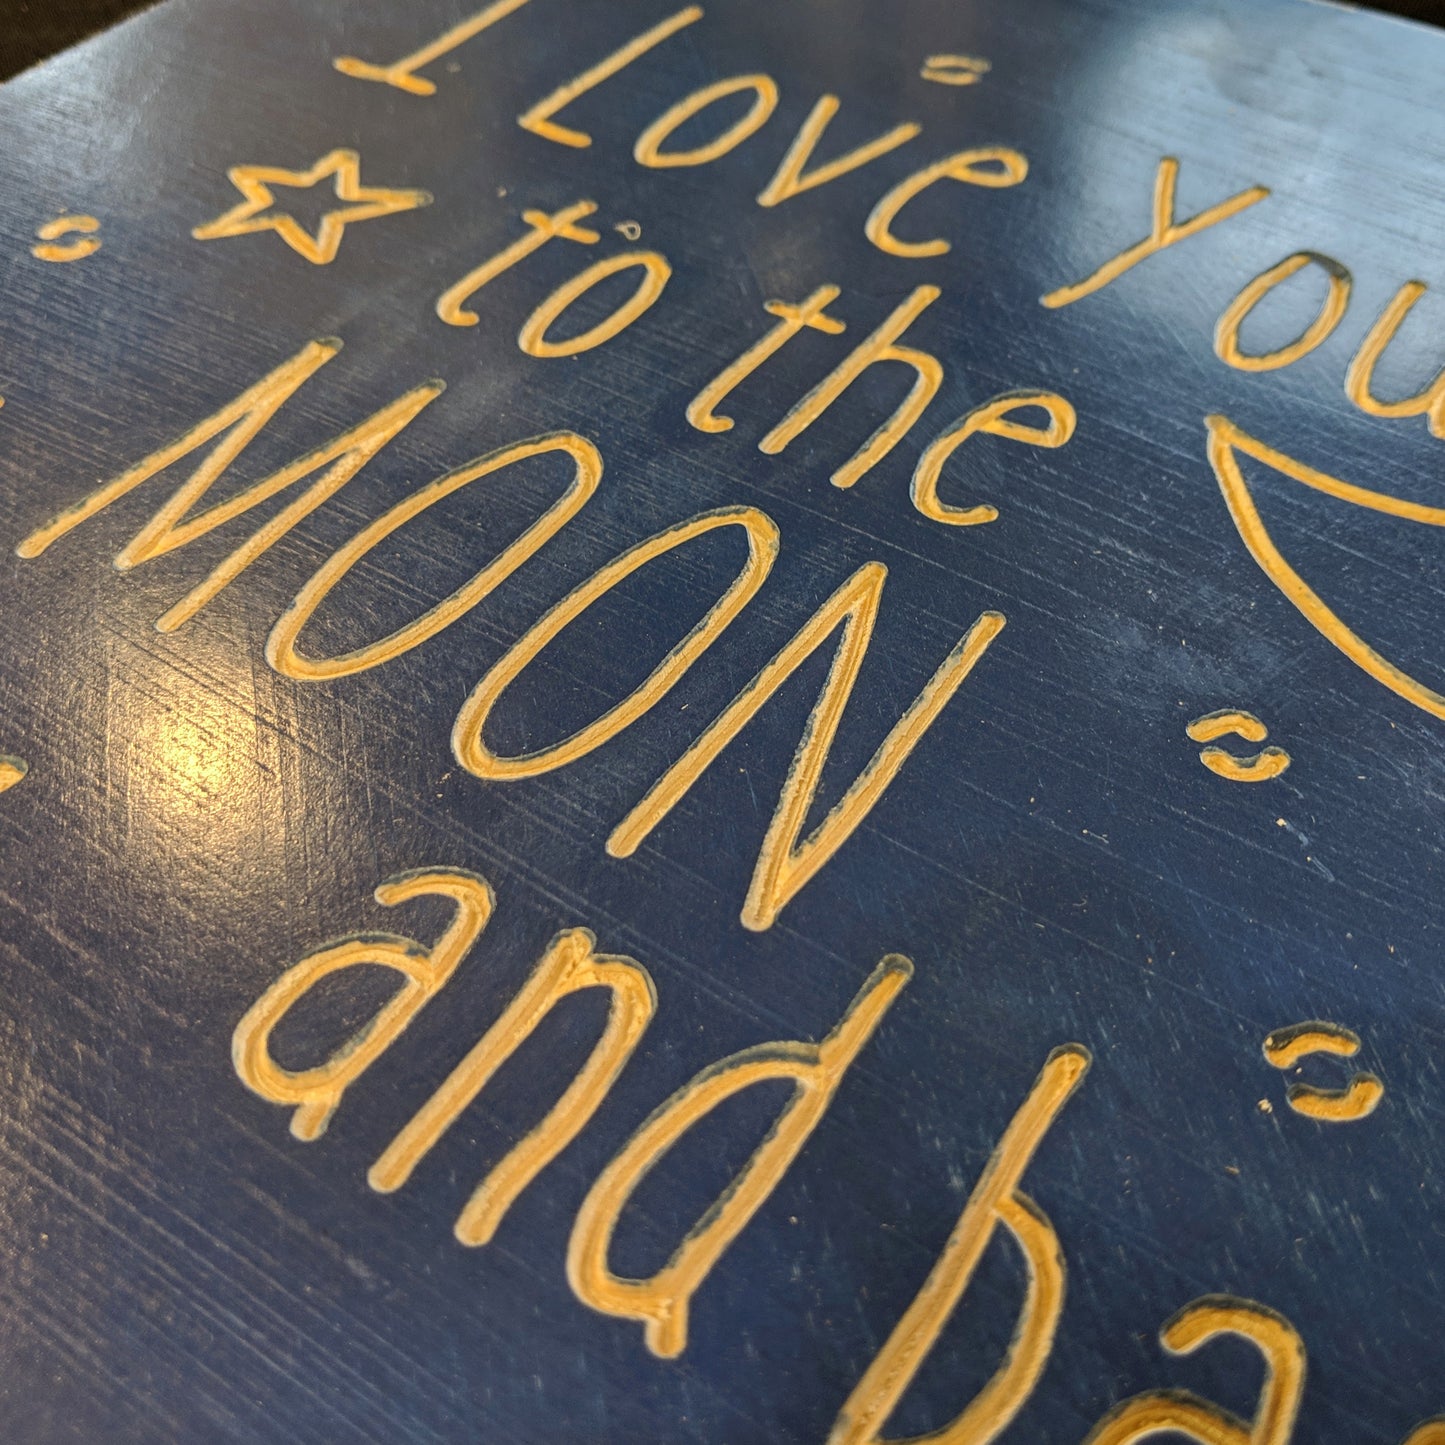 Hand Engraved Signs